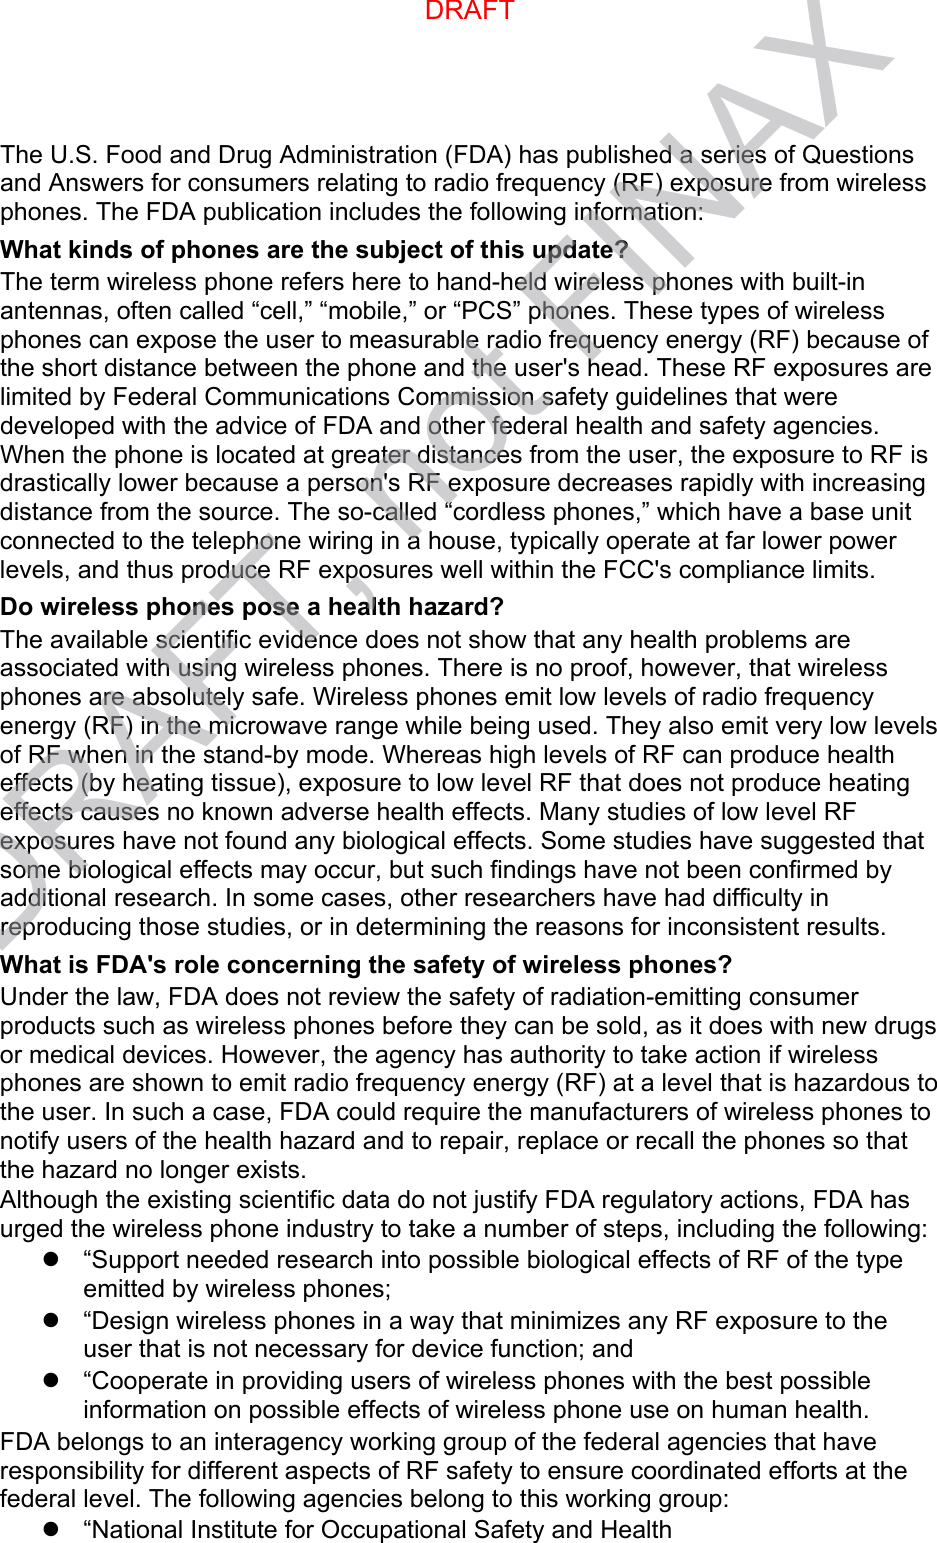 The U.S. Food and Drug Administration (FDA) has published a series of Questions and Answers for consumers relating to radio frequency (RF) exposure from wireless phones. The FDA publication includes the following information: What kinds of phones are the subject of this update? The term wireless phone refers here to hand-held wireless phones with built-in antennas, often called “cell,” “mobile,” or “PCS” phones. These types of wireless phones can expose the user to measurable radio frequency energy (RF) because of the short distance between the phone and the user&apos;s head. These RF exposures are limited by Federal Communications Commission safety guidelines that were developed with the advice of FDA and other federal health and safety agencies. When the phone is located at greater distances from the user, the exposure to RF is drastically lower because a person&apos;s RF exposure decreases rapidly with increasing distance from the source. The so-called “cordless phones,” which have a base unit connected to the telephone wiring in a house, typically operate at far lower power levels, and thus produce RF exposures well within the FCC&apos;s compliance limits. Do wireless phones pose a health hazard? The available scientific evidence does not show that any health problems are associated with using wireless phones. There is no proof, however, that wireless phones are absolutely safe. Wireless phones emit low levels of radio frequency energy (RF) in the microwave range while being used. They also emit very low levels of RF when in the stand-by mode. Whereas high levels of RF can produce health effects (by heating tissue), exposure to low level RF that does not produce heating effects causes no known adverse health effects. Many studies of low level RF exposures have not found any biological effects. Some studies have suggested that some biological effects may occur, but such findings have not been confirmed by additional research. In some cases, other researchers have had difficulty in reproducing those studies, or in determining the reasons for inconsistent results. What is FDA&apos;s role concerning the safety of wireless phones? Under the law, FDA does not review the safety of radiation-emitting consumer products such as wireless phones before they can be sold, as it does with new drugs or medical devices. However, the agency has authority to take action if wireless phones are shown to emit radio frequency energy (RF) at a level that is hazardous to the user. In such a case, FDA could require the manufacturers of wireless phones to notify users of the health hazard and to repair, replace or recall the phones so that the hazard no longer exists. Although the existing scientific data do not justify FDA regulatory actions, FDA has urged the wireless phone industry to take a number of steps, including the following: “Support needed research into possible biological effects of RF of the typeemitted by wireless phones;“Design wireless phones in a way that minimizes any RF exposure to theuser that is not necessary for device function; and“Cooperate in providing users of wireless phones with the best possibleinformation on possible effects of wireless phone use on human health.FDA belongs to an interagency working group of the federal agencies that have responsibility for different aspects of RF safety to ensure coordinated efforts at the federal level. The following agencies belong to this working group: “National Institute for Occupational Safety and HealthDRAFTDRAFT, not FINAX